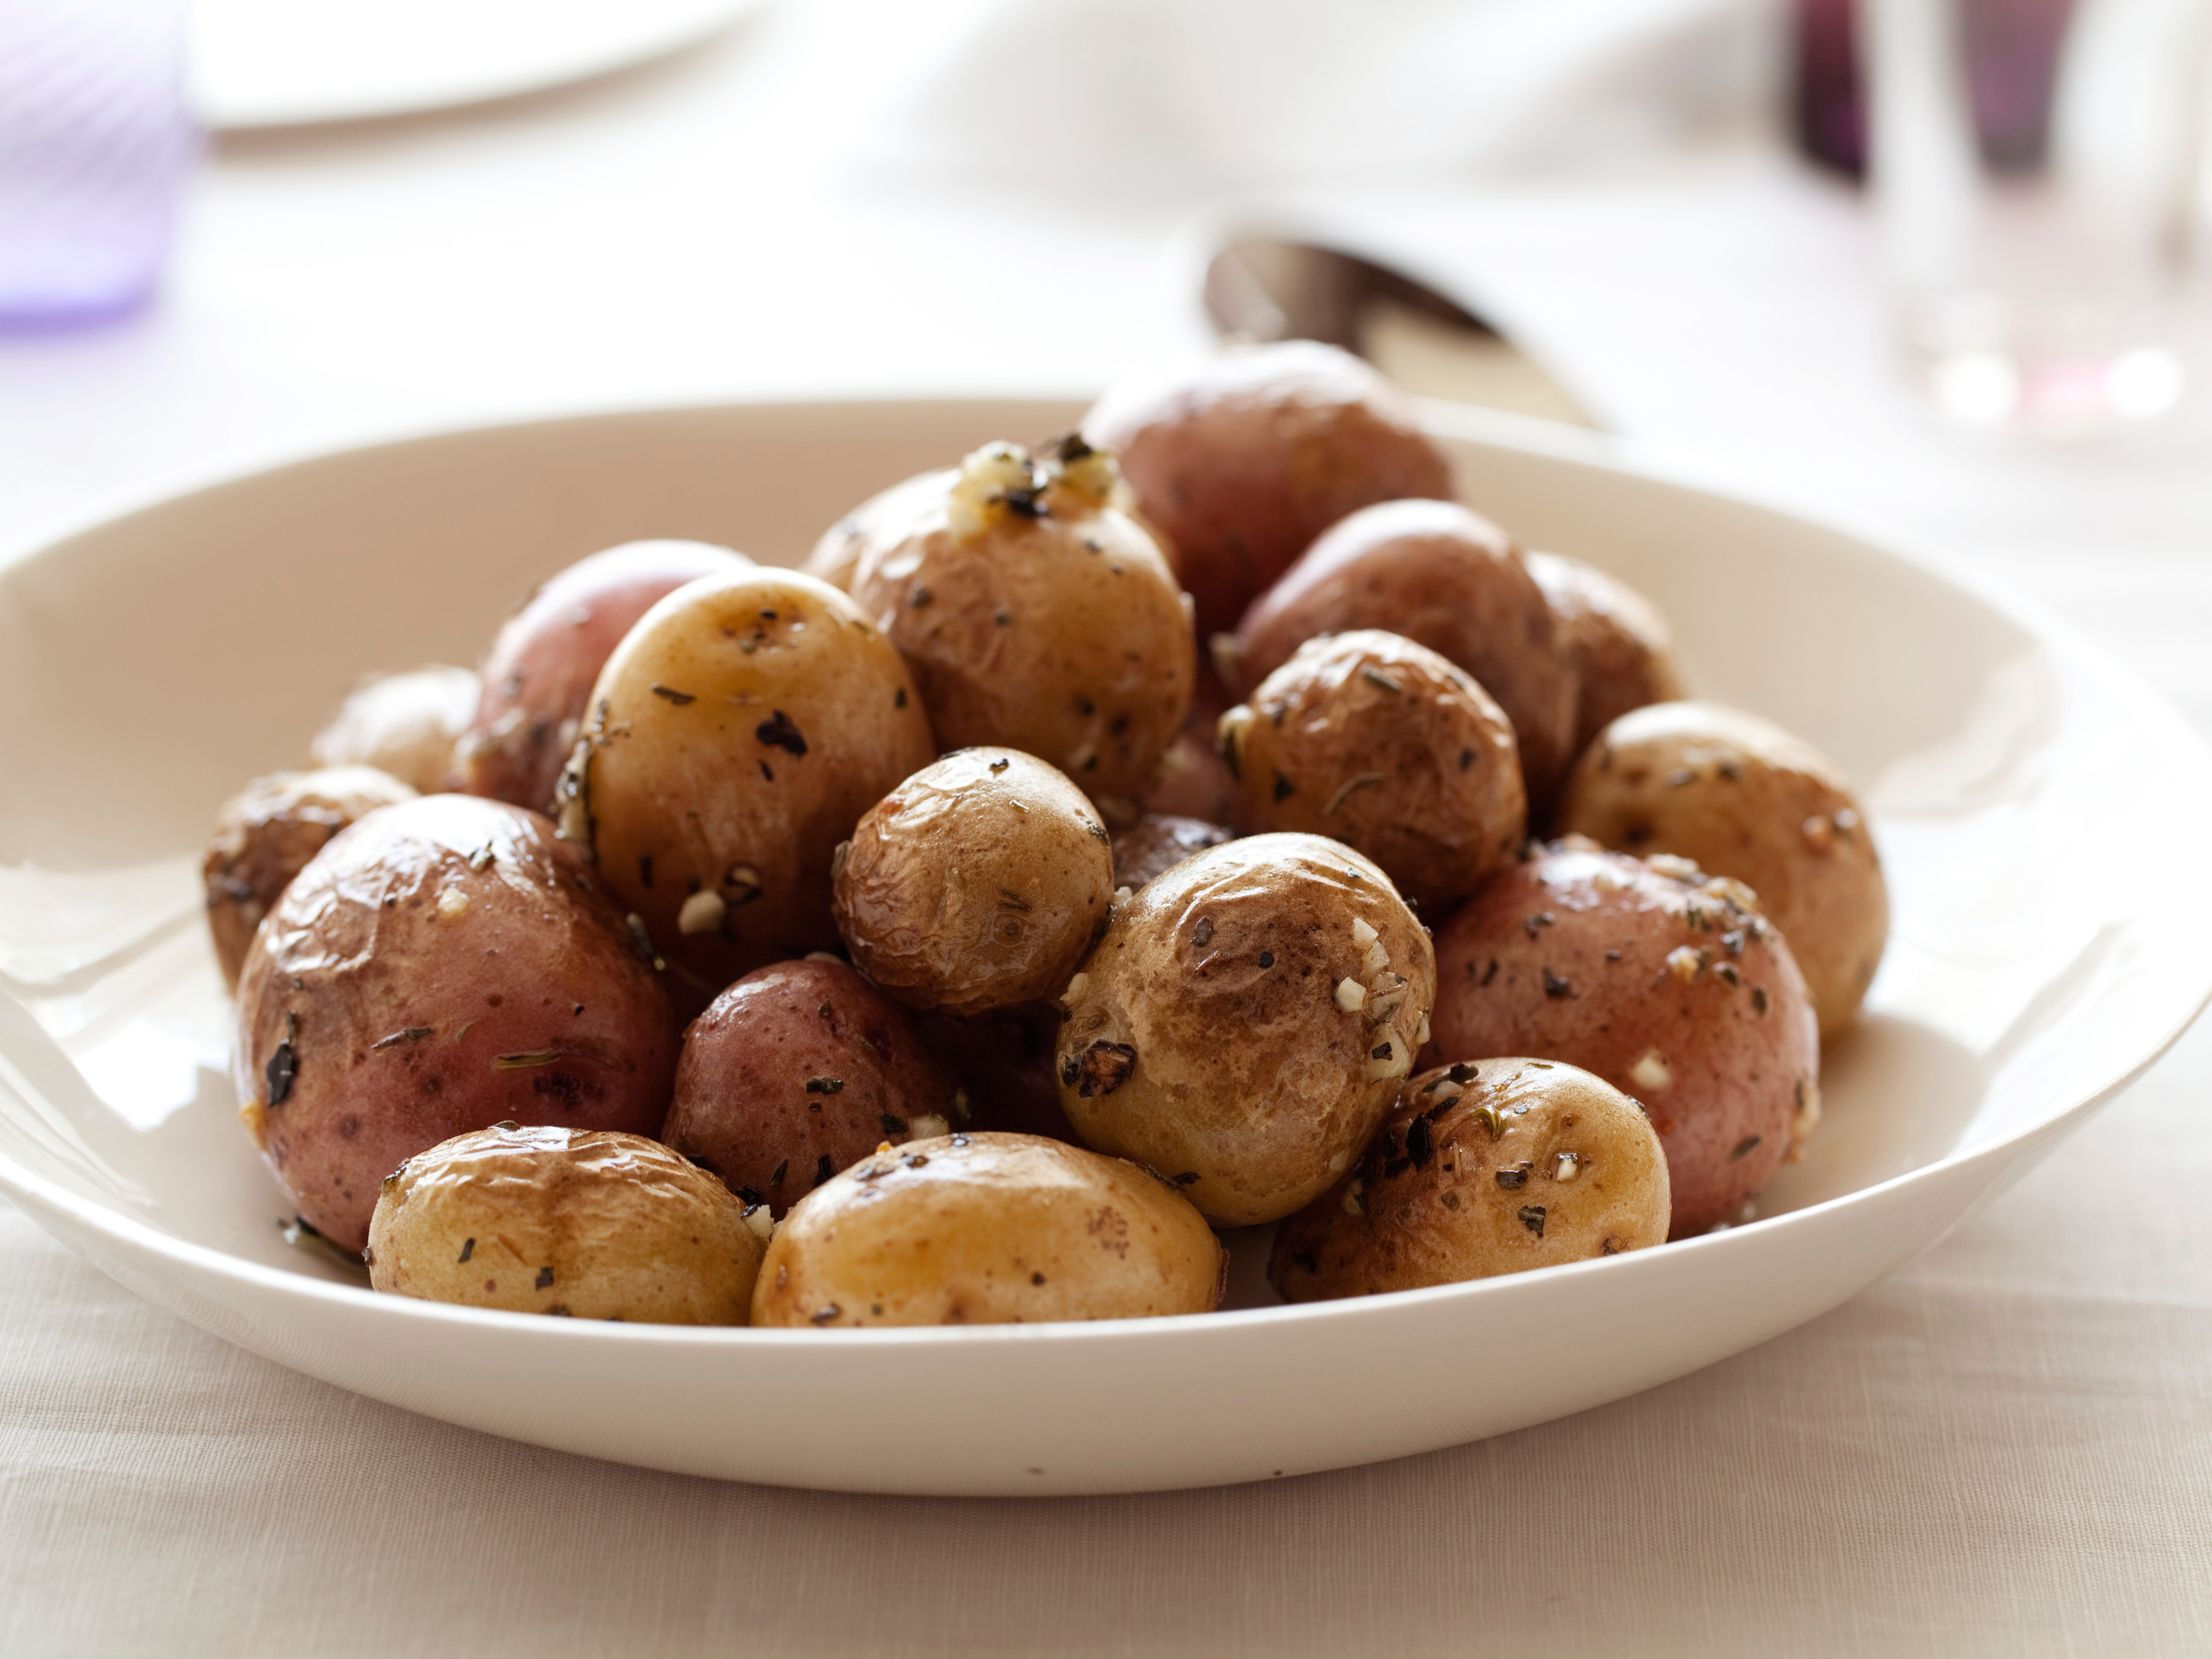 What Are New Potatoes?